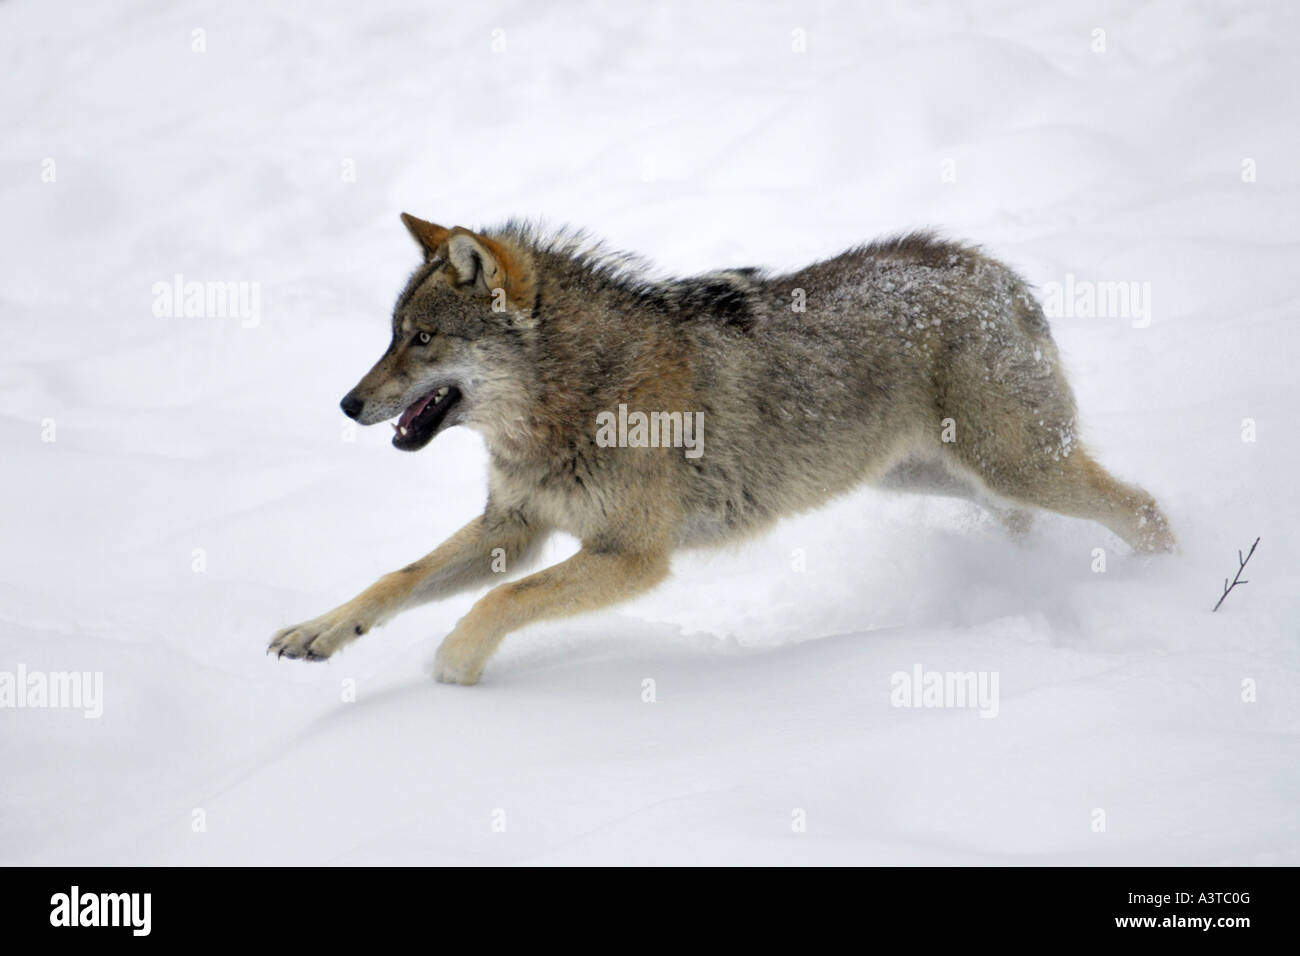 European gray wolf (Canis lupus lupus), jumping in snow Stock Photo